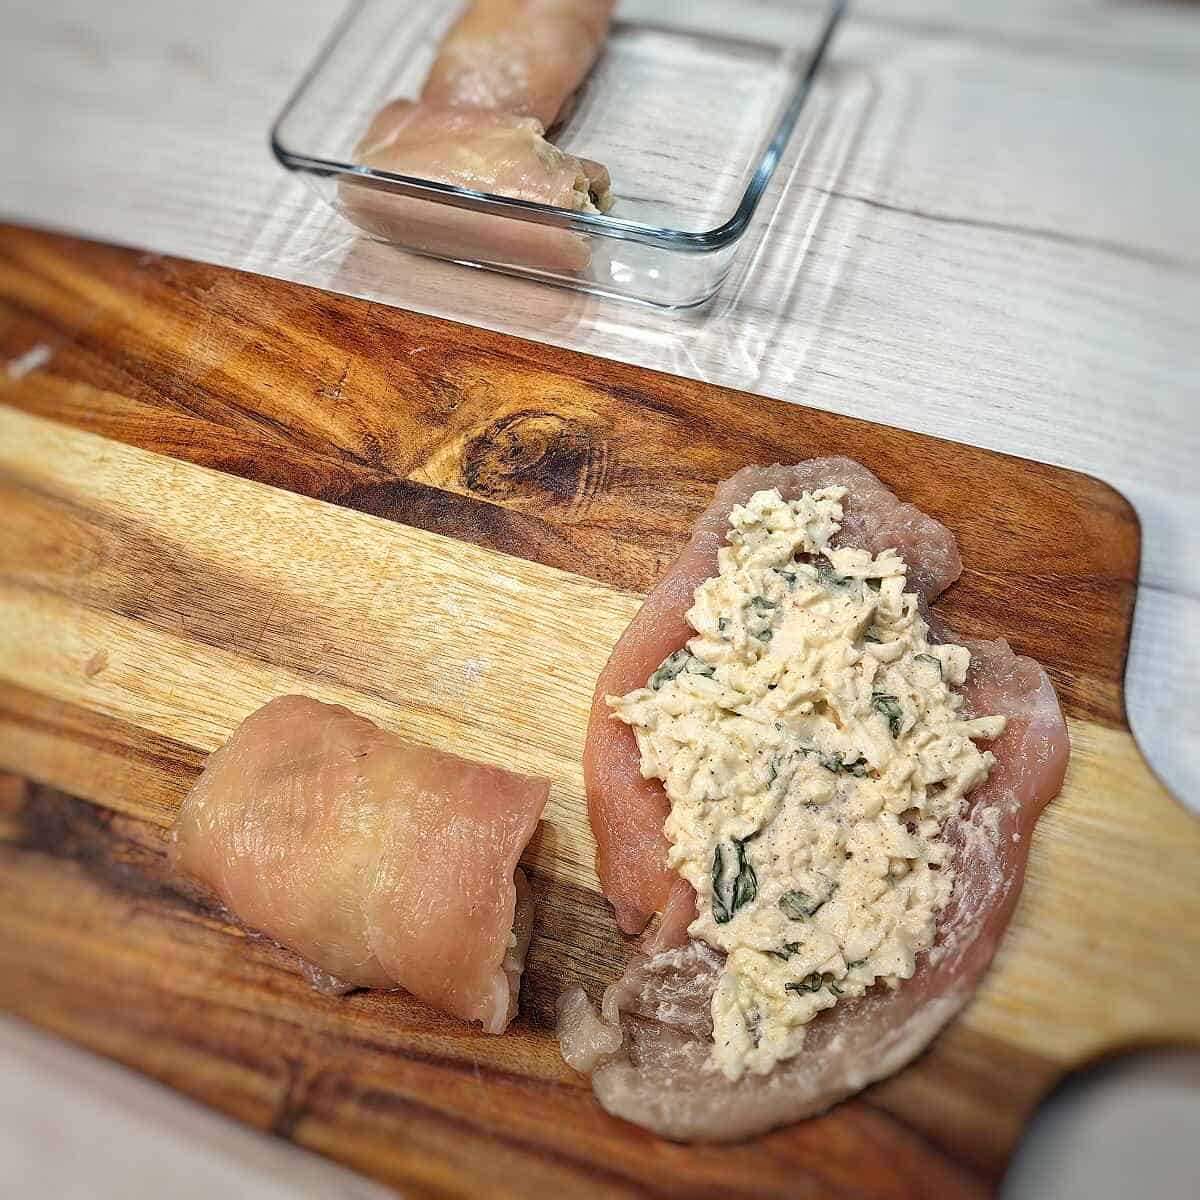 chicken breast with cheese and herb mixture and a rolled up stuffed chicken breast